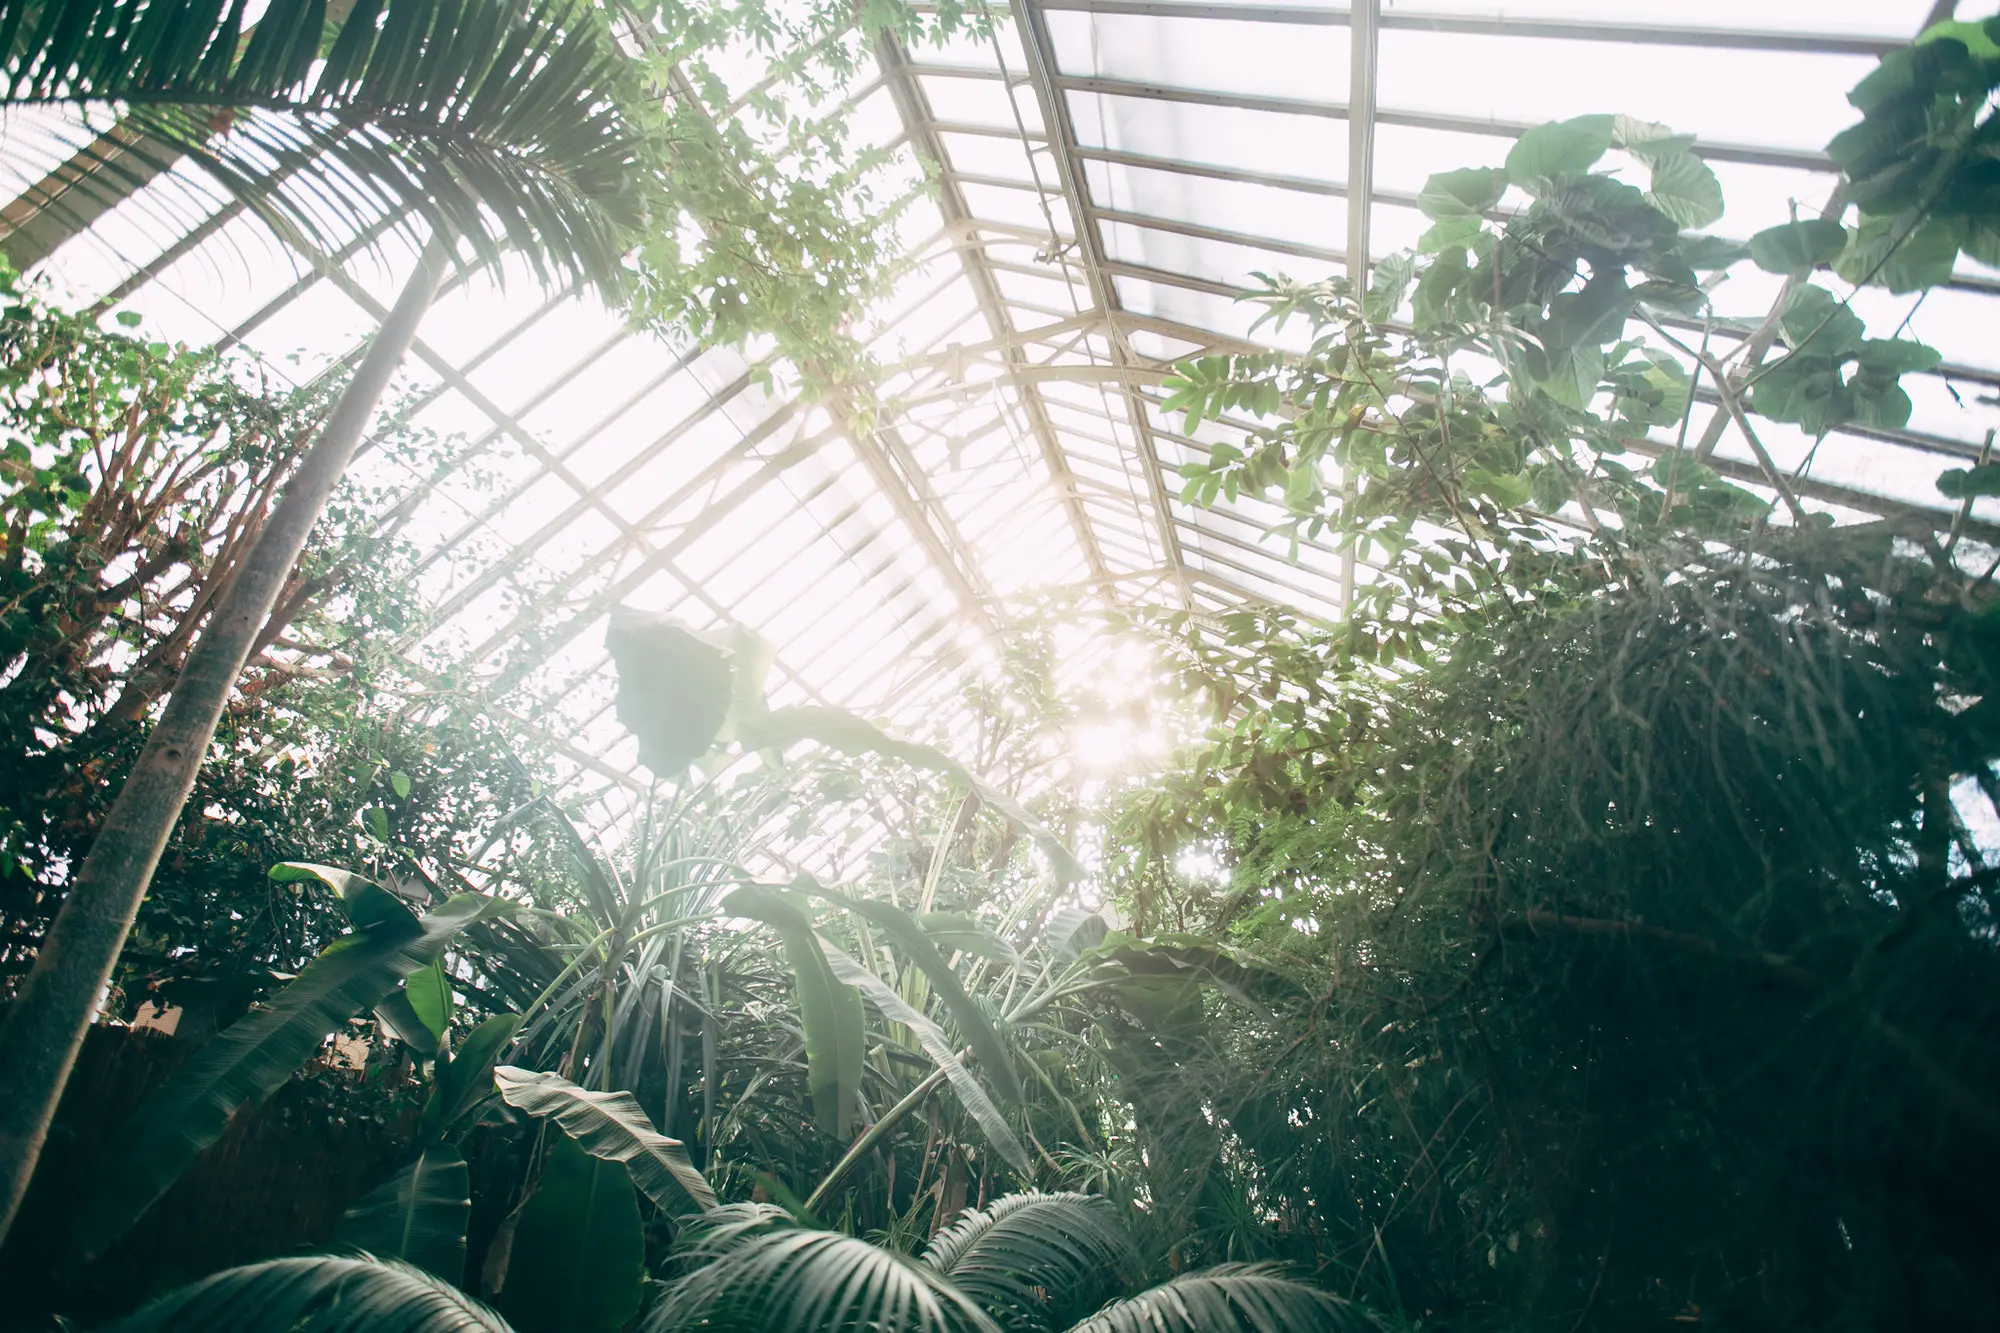 Do Greenhouses Need Direct Sunlight? - Greenhouse Gusto